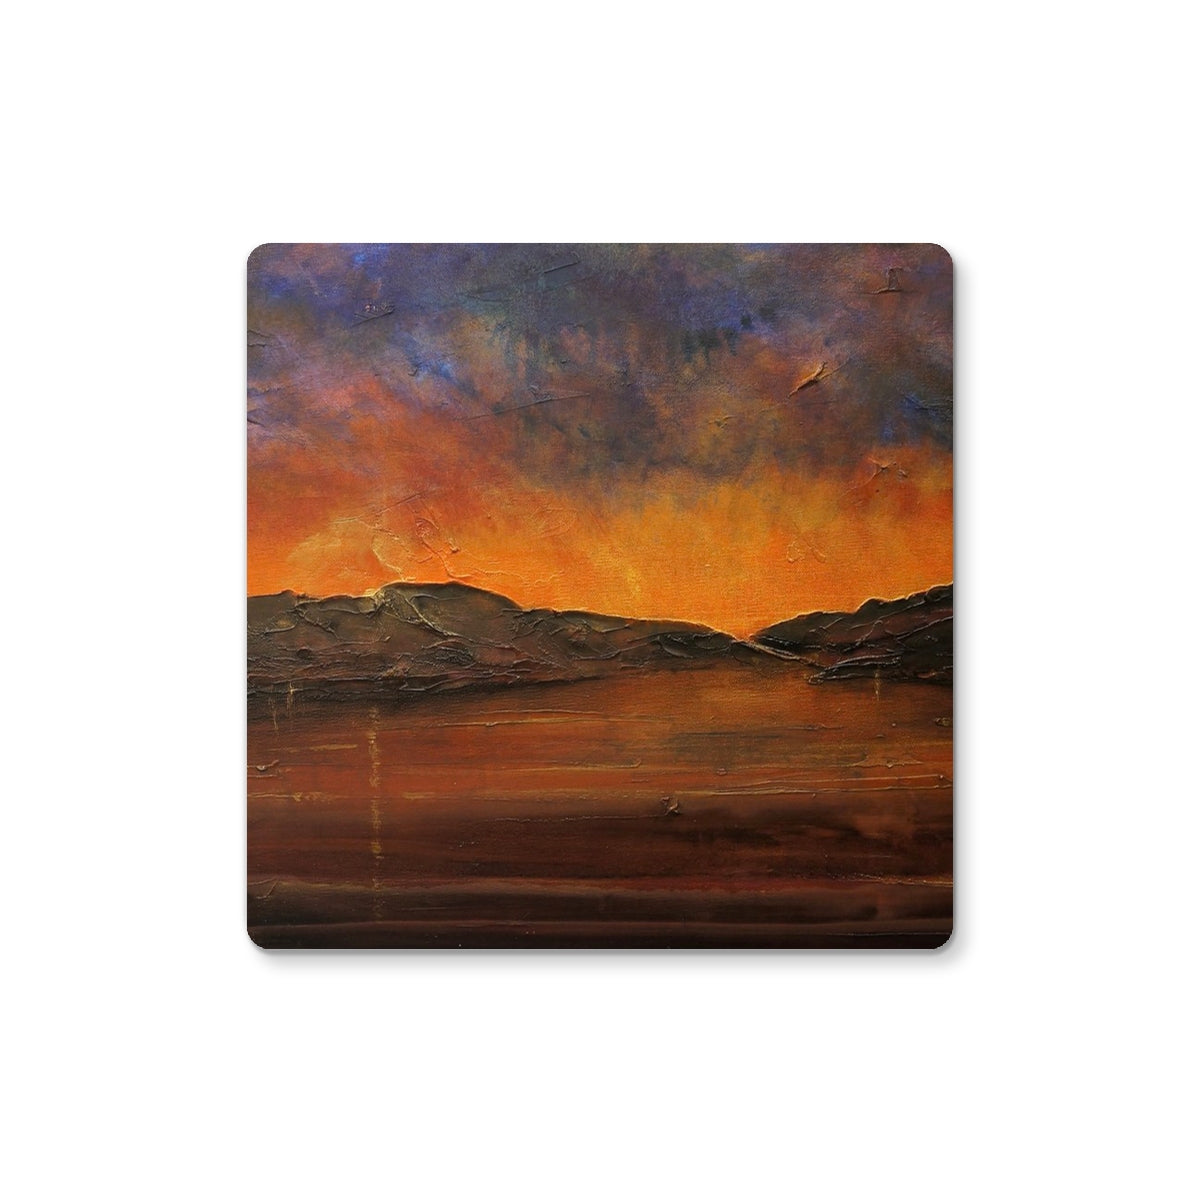 A Brooding Clyde Dusk Art Gifts Coaster-Homeware-River Clyde Art Gallery-6 Coasters-Paintings, Prints, Homeware, Art Gifts From Scotland By Scottish Artist Kevin Hunter